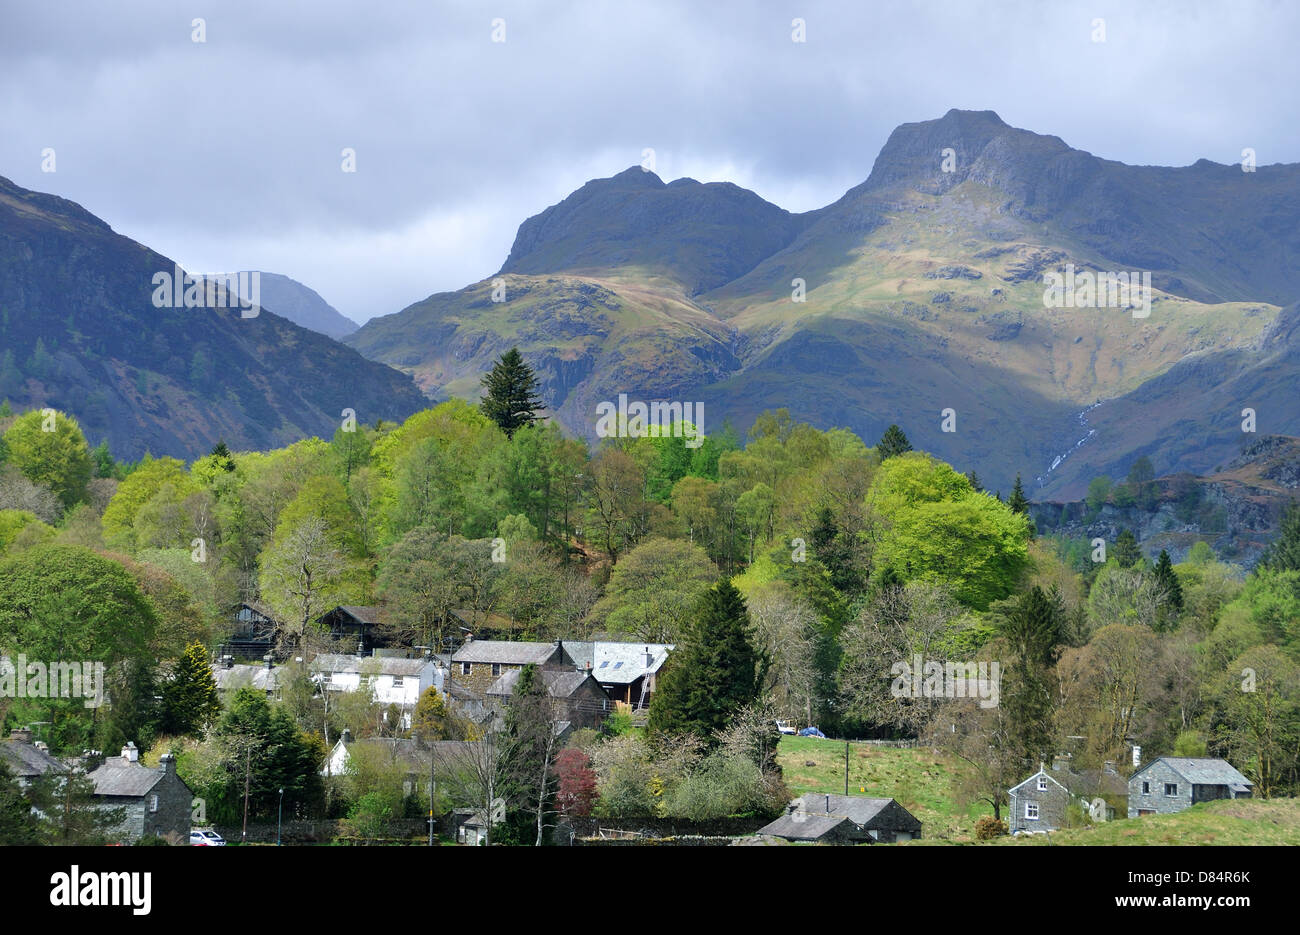 The Langdale Pikes with Elterwater in the foreground, early spring. Stock Photo